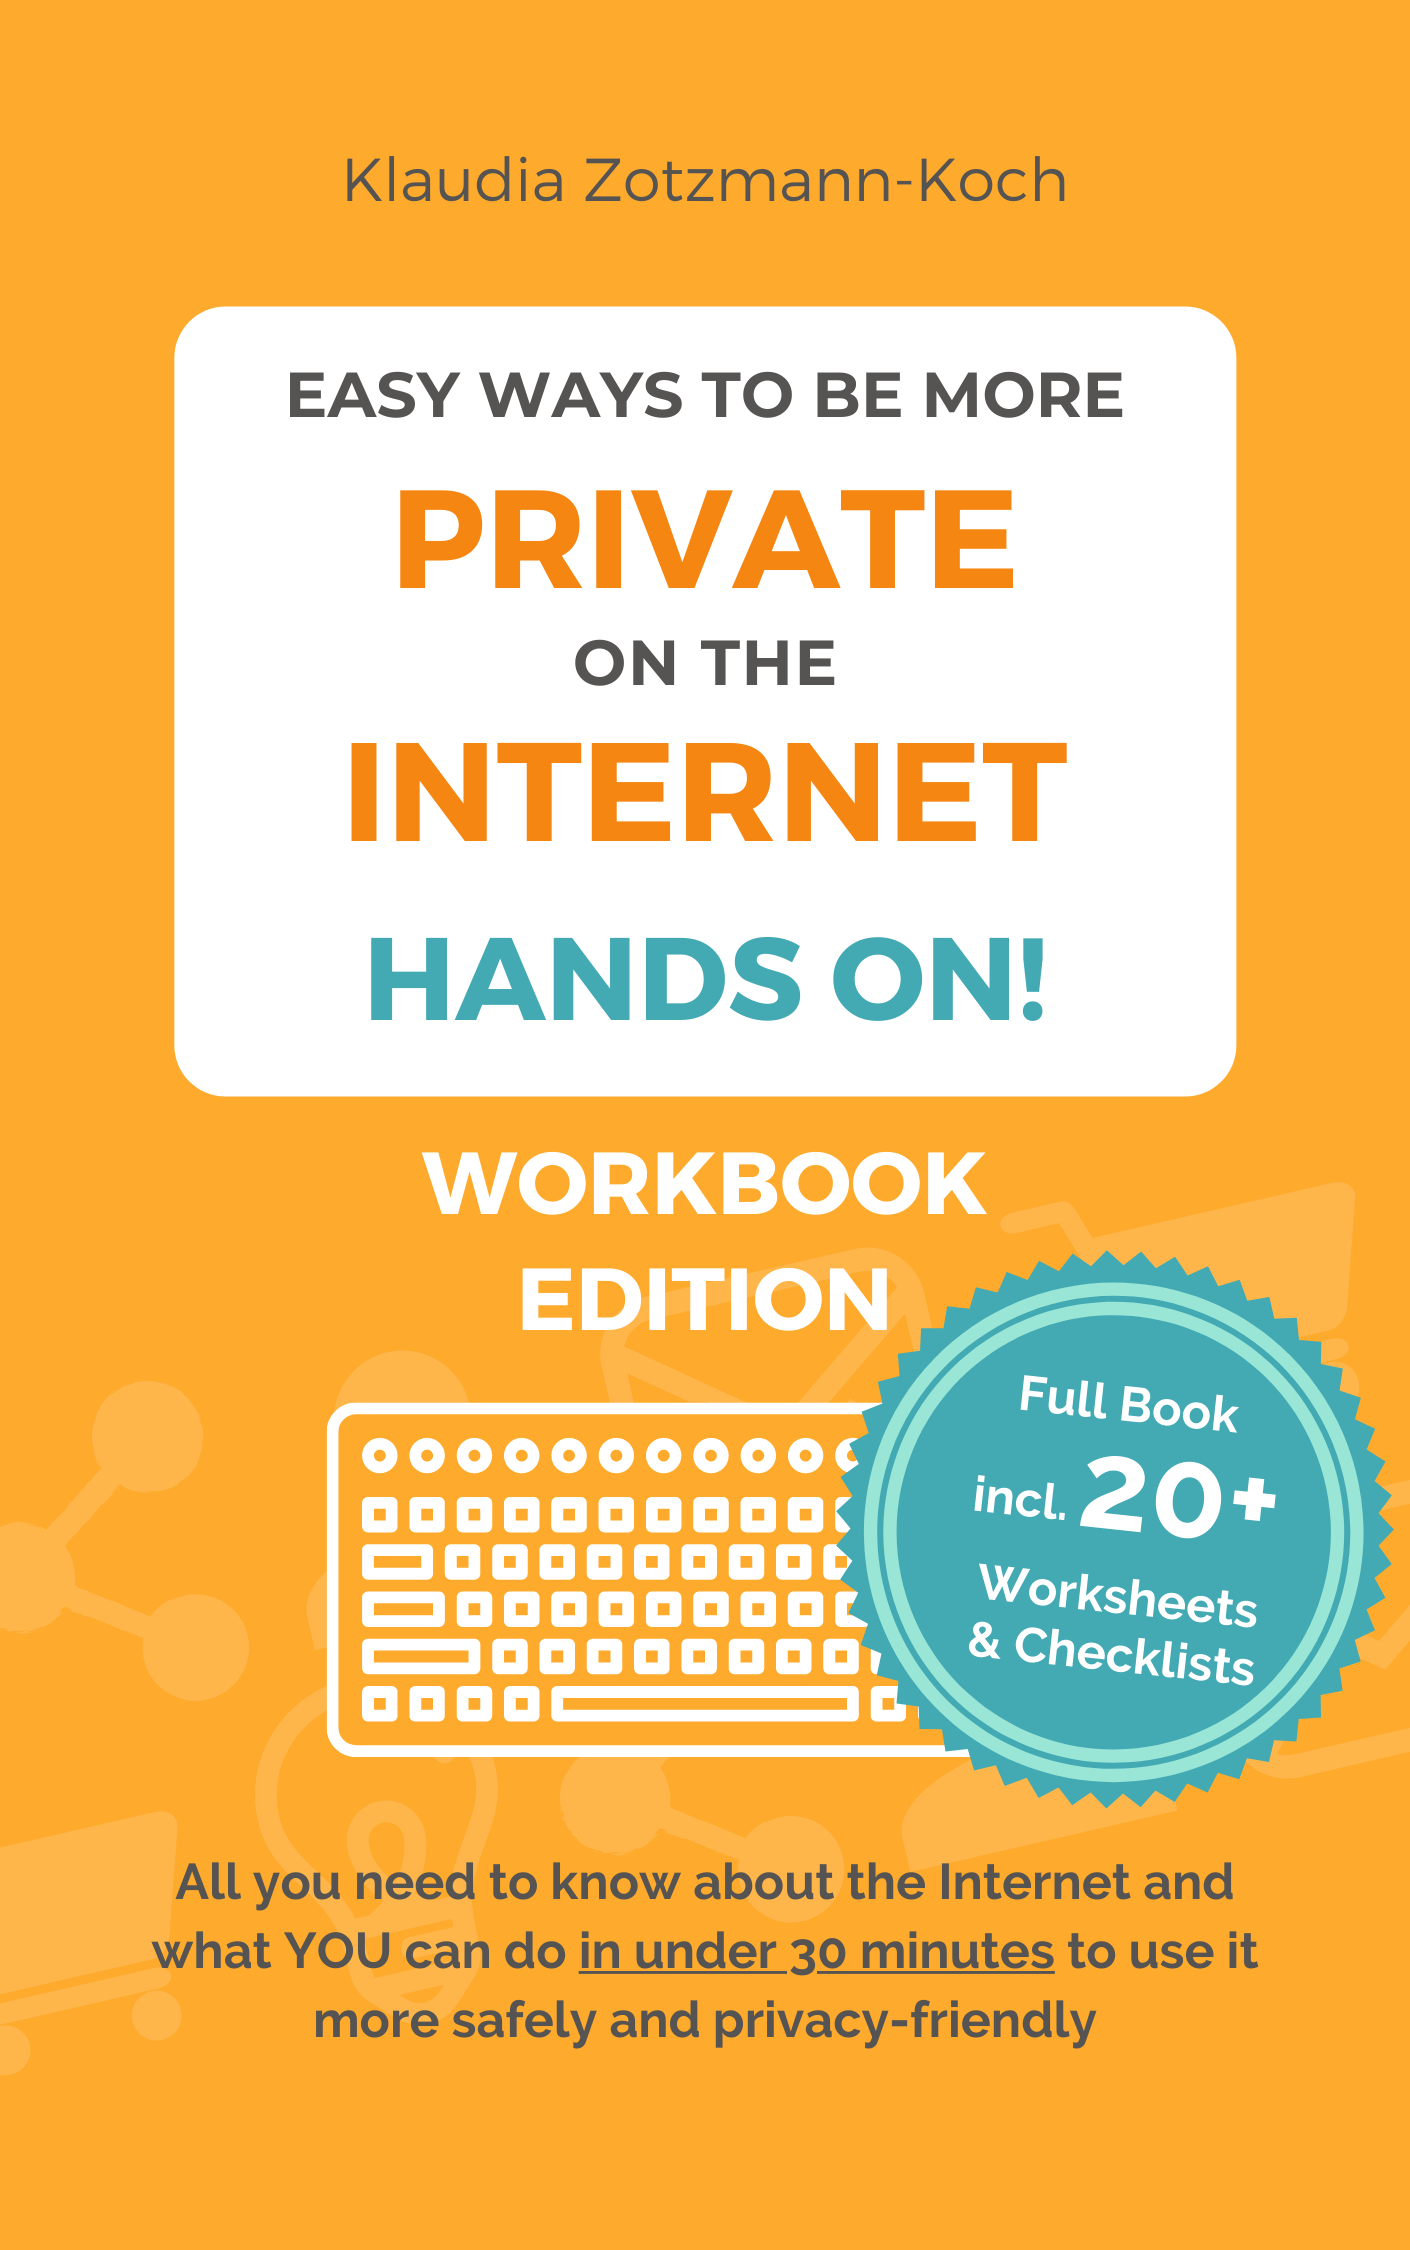 Coming soon: Easy Ways to Be More Private on the Internet – HANDS ON!